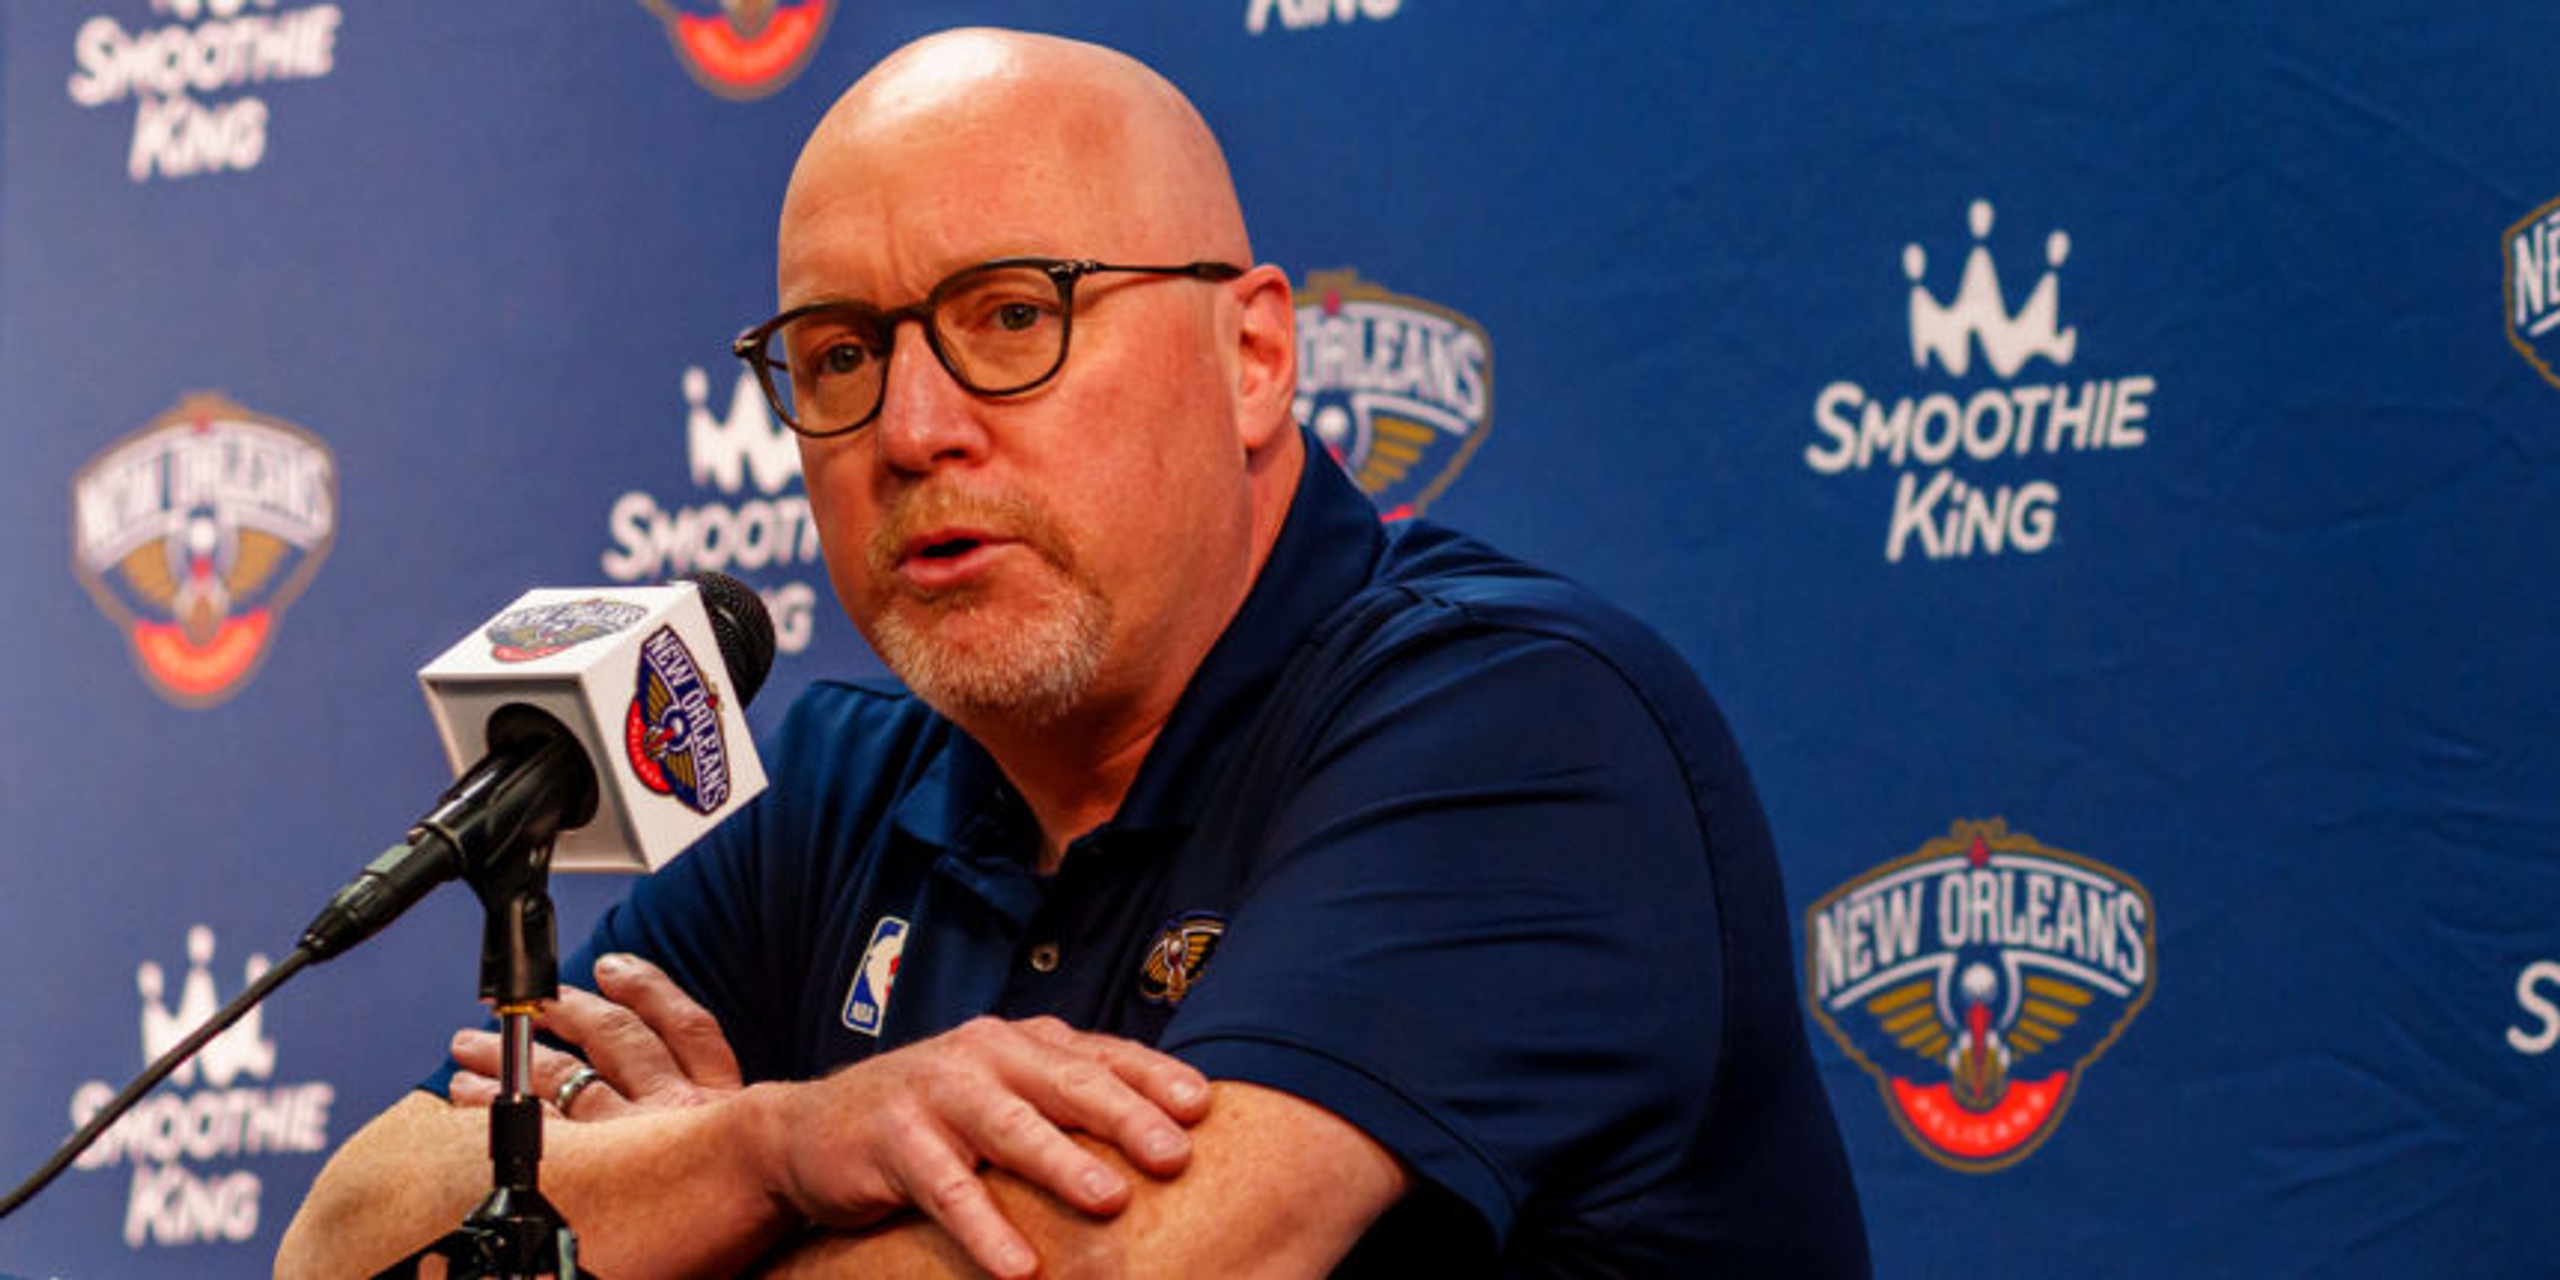 Pelicans exec David Griffin on hot seat after bad start, altercation?